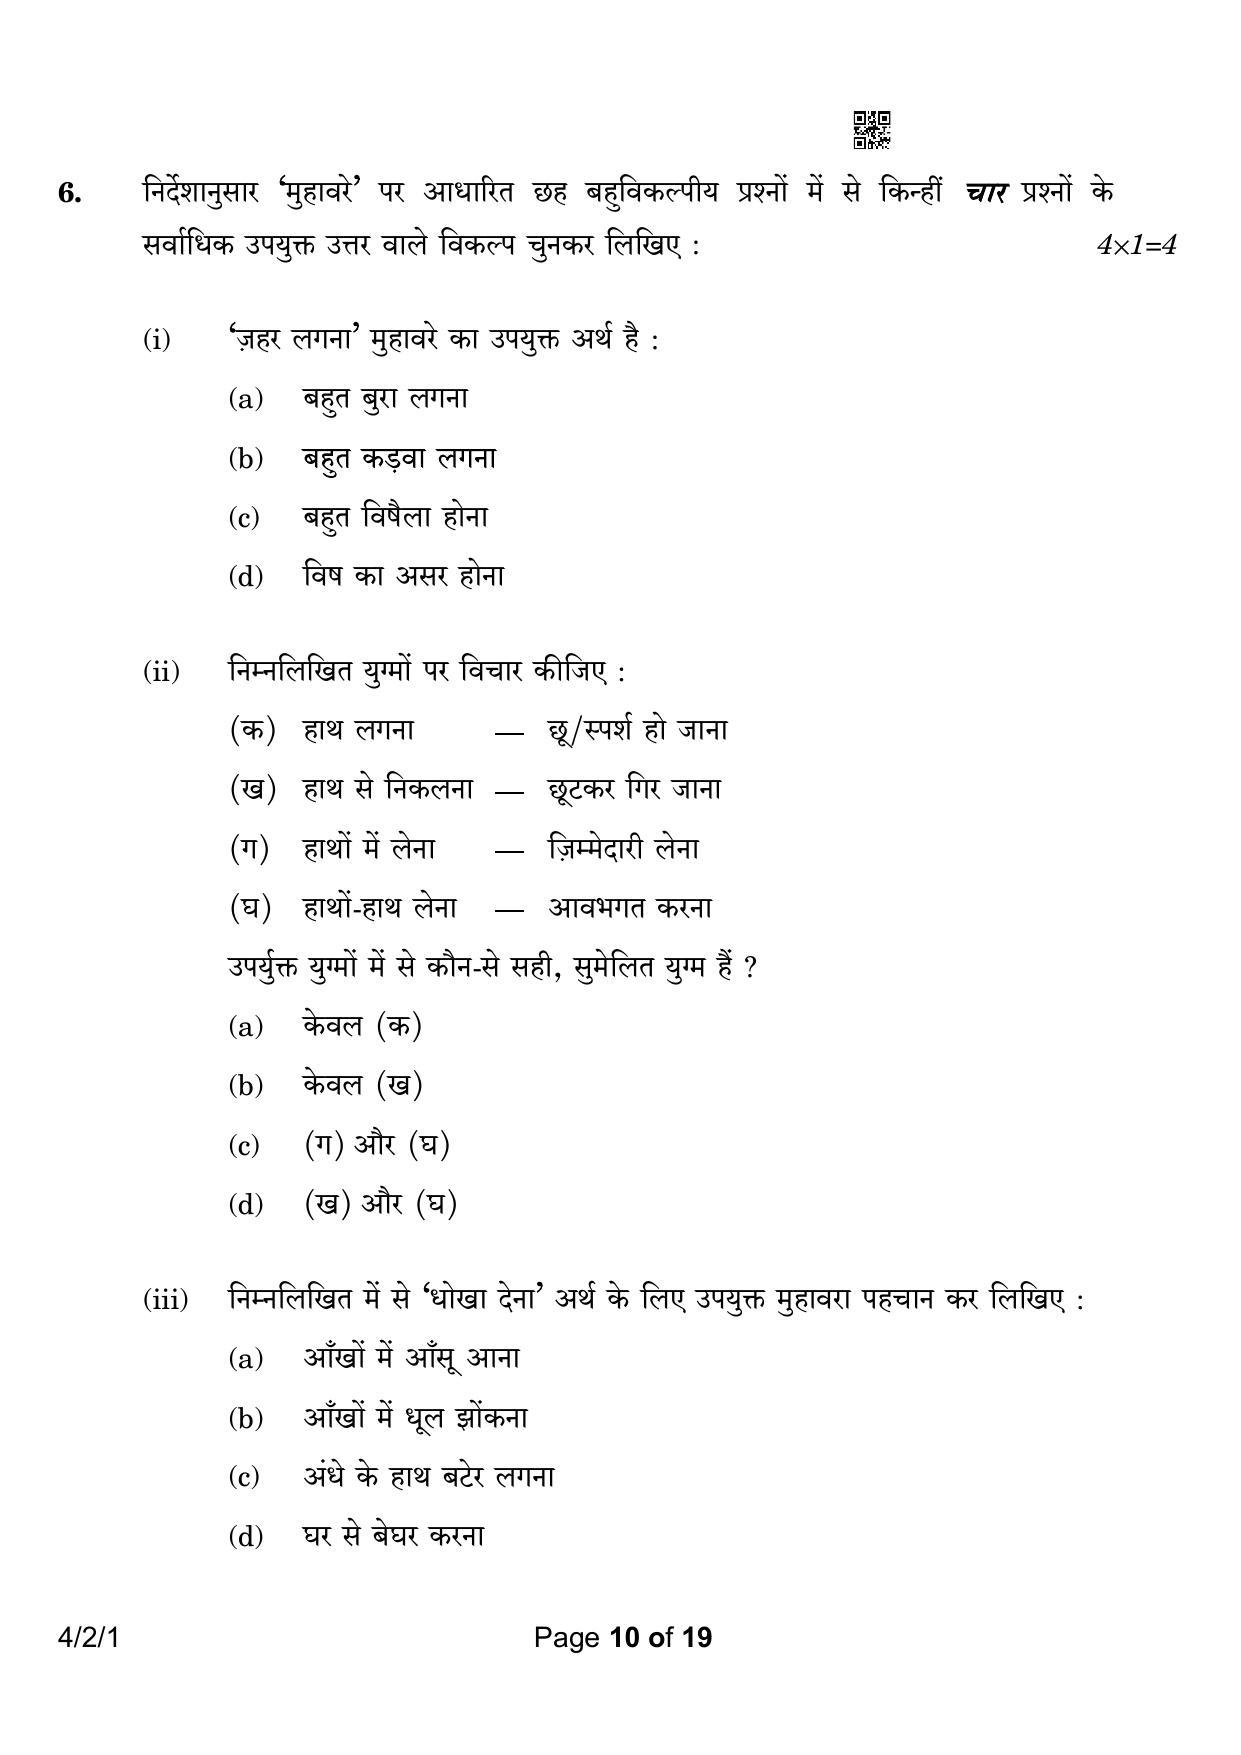 CBSE Class 10 4-2-1 Hindi B 2023 Question Paper - Page 10